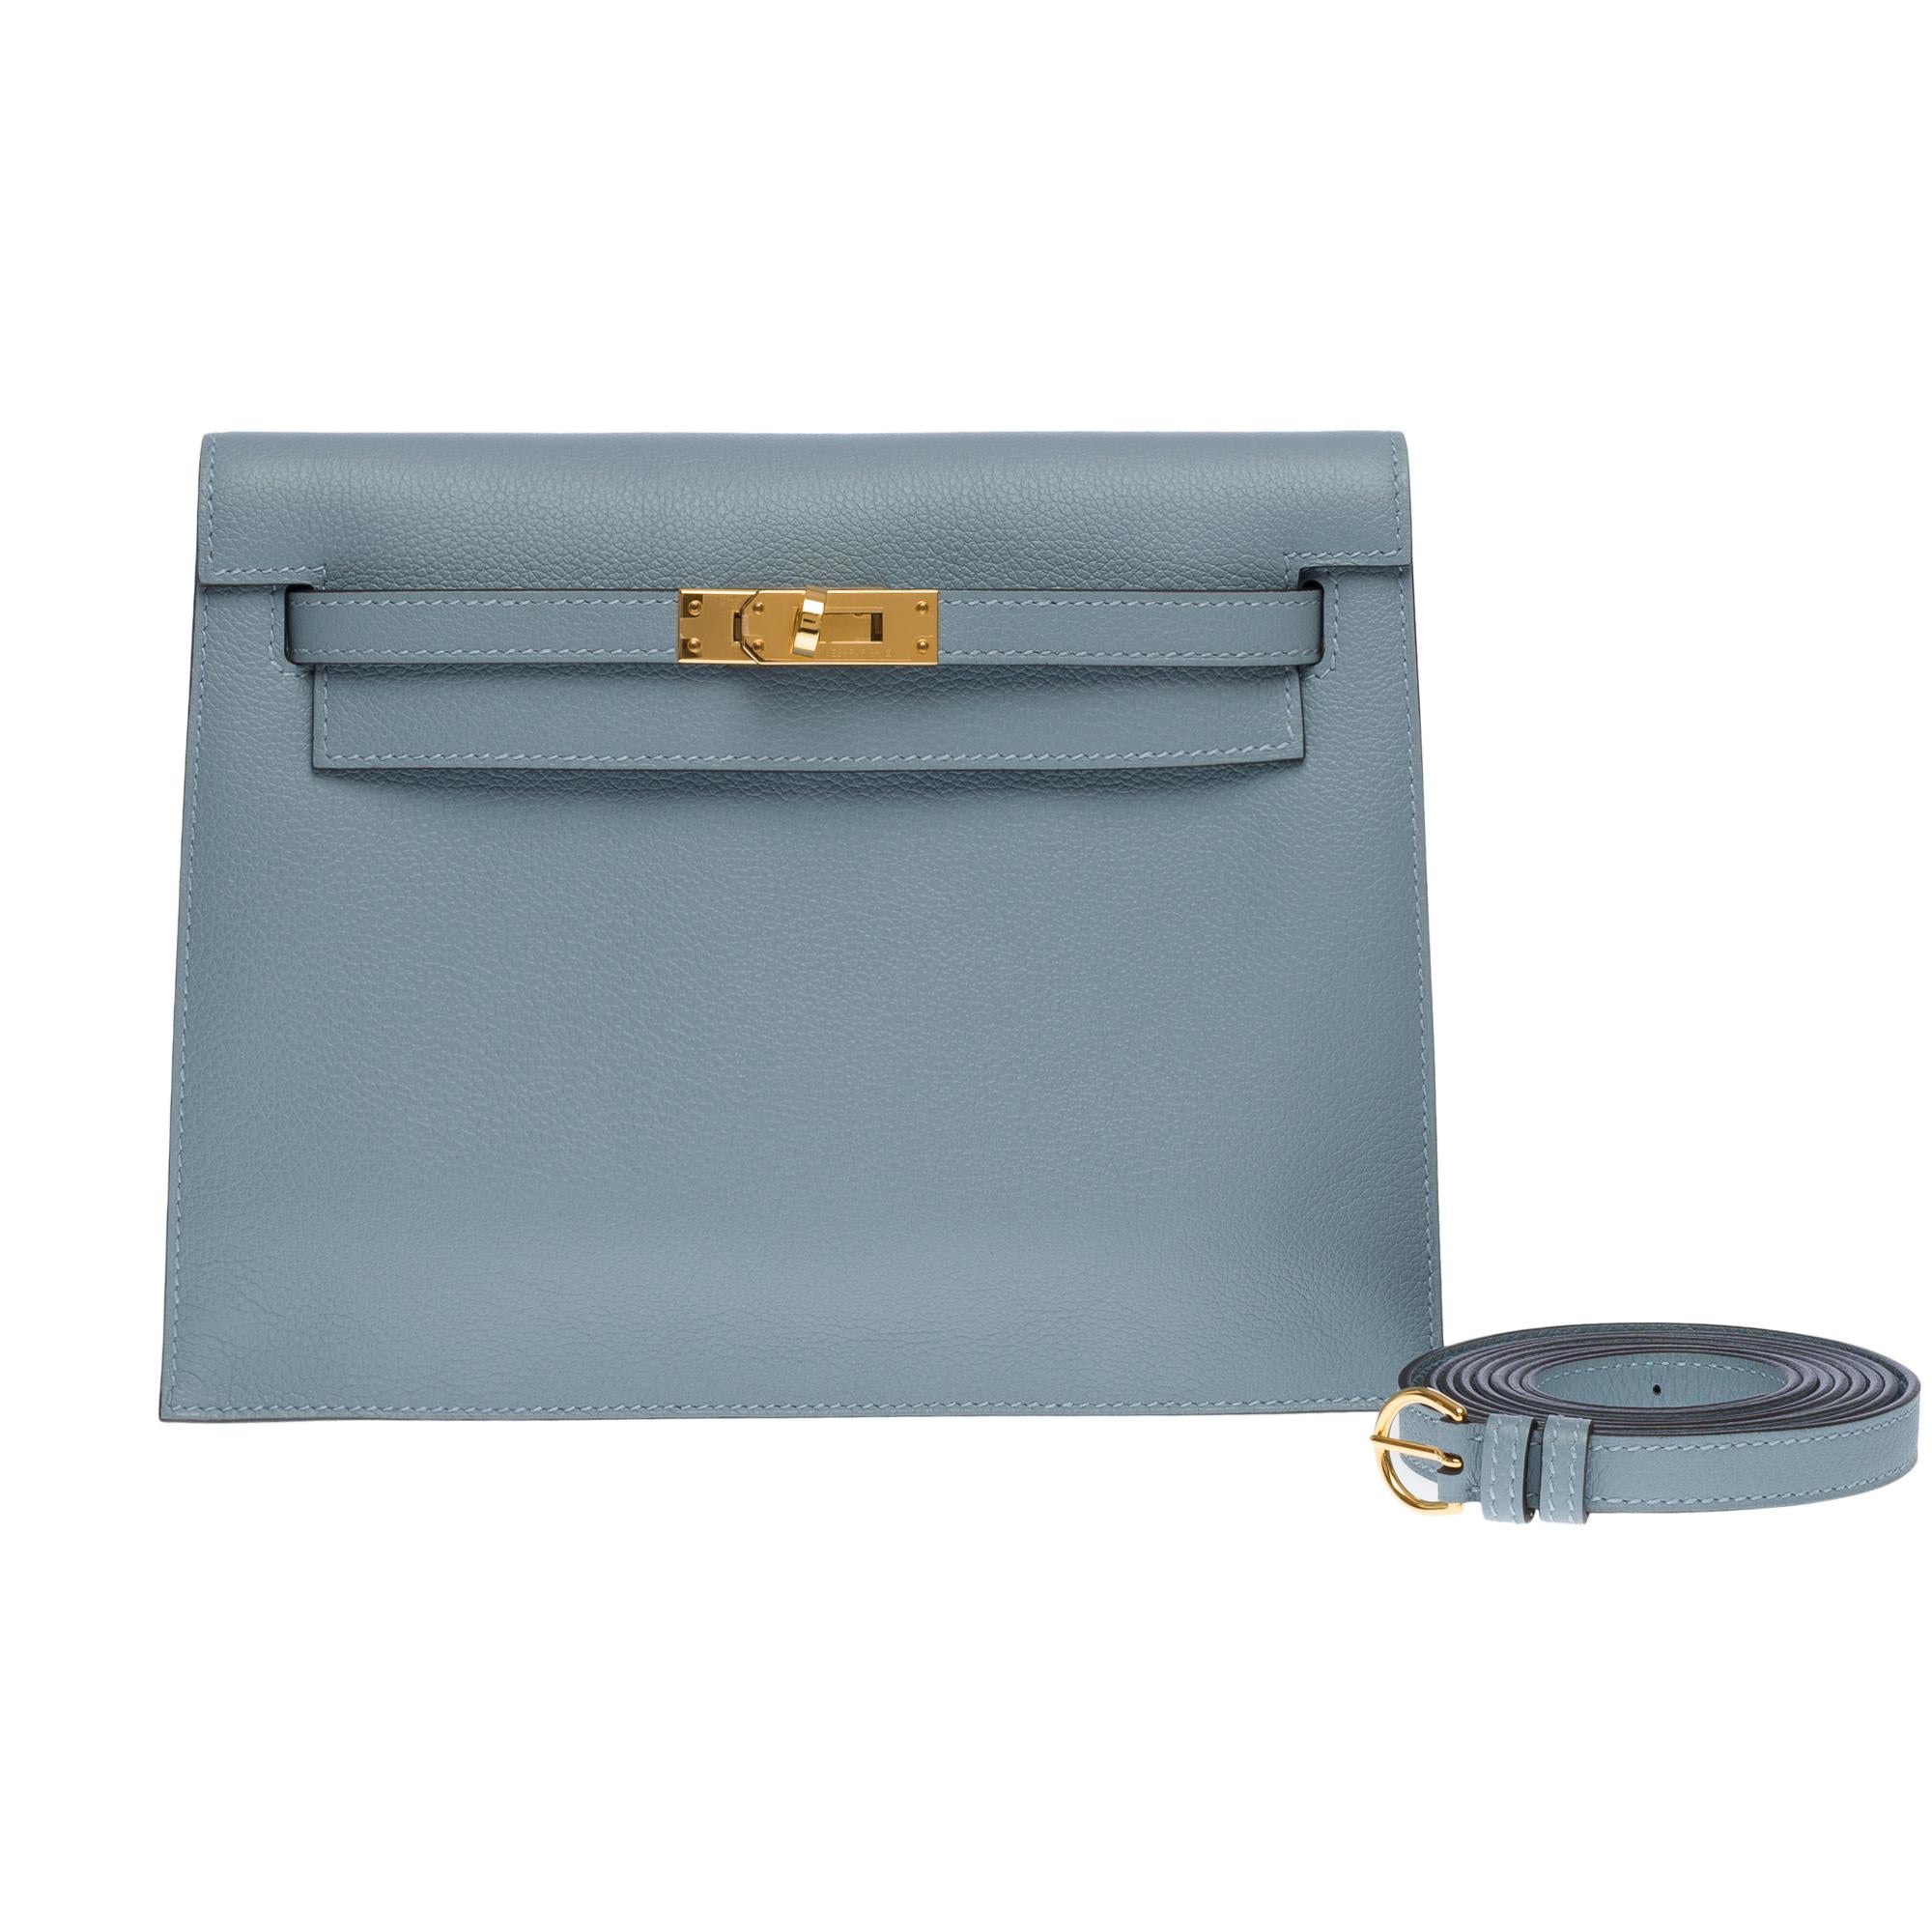 Charming Hermes Danse Belt-Pouch in Blue lin Evercolor leather , gold-plated metal hardware, adjustable removable handle in blue leather allowing an adjustment of the pouch at the waist or shoulder carry

Flap closure
Inner lining in blue leather,